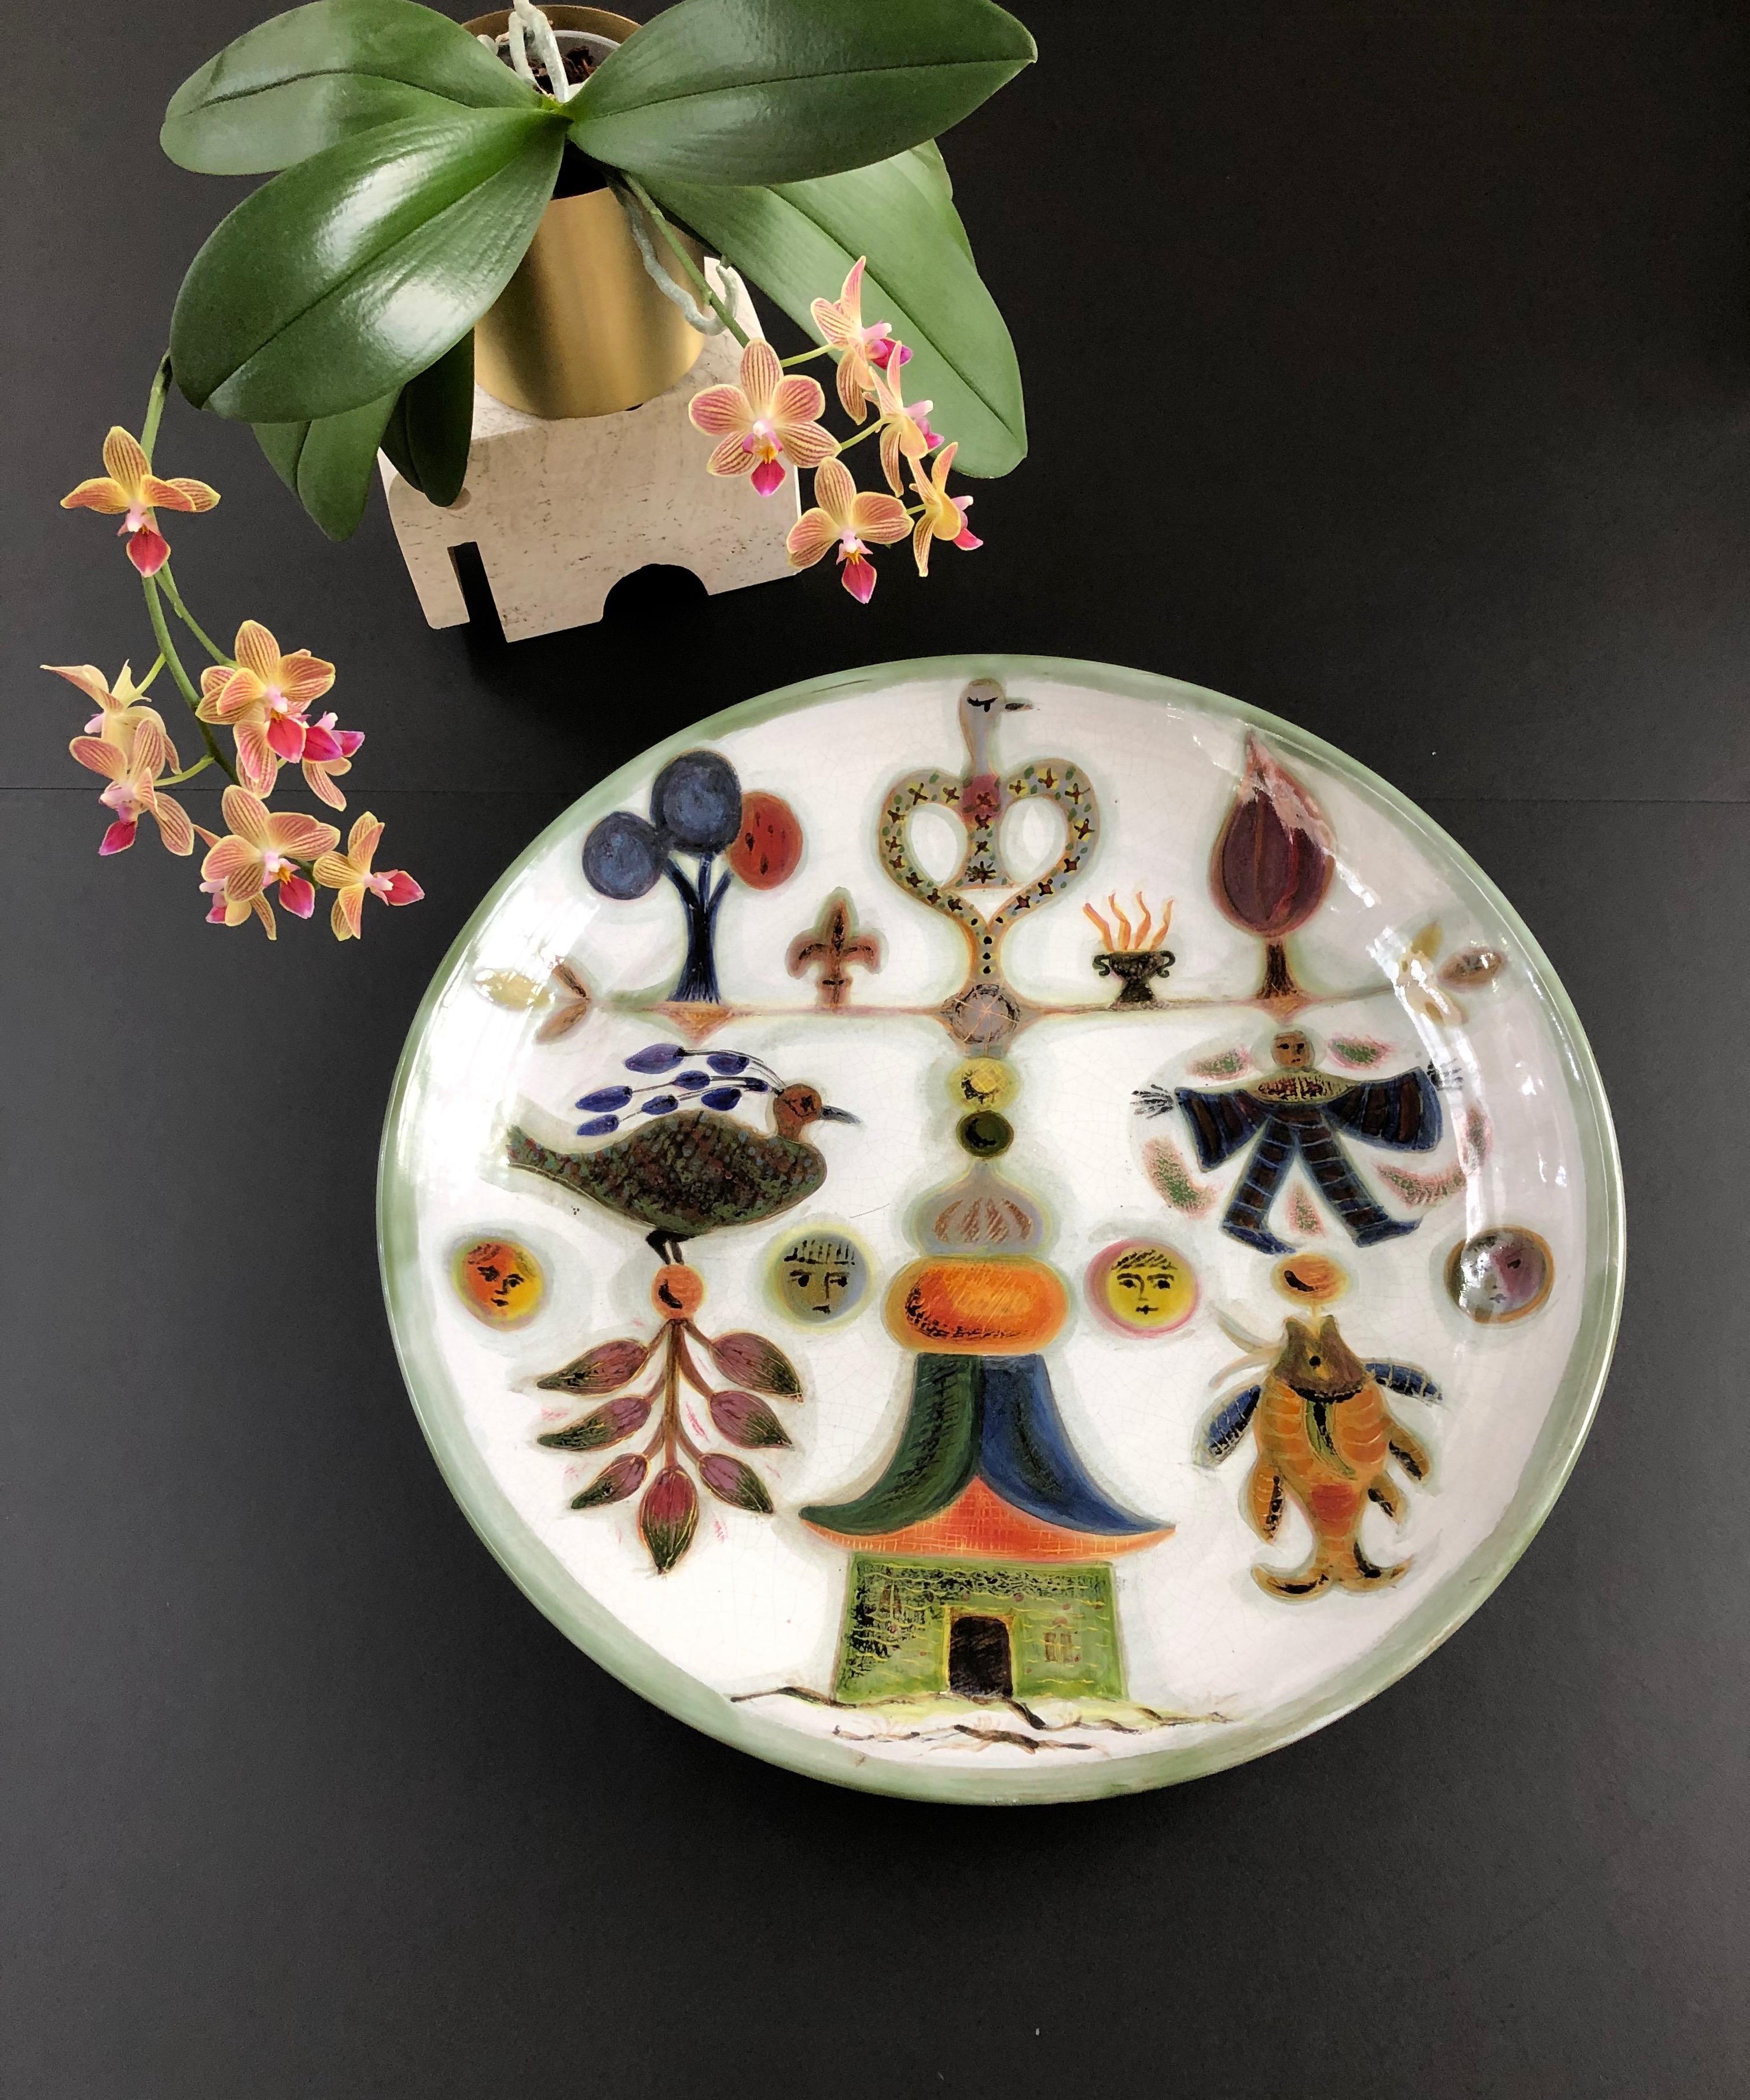 Decorative ceramic platter by David Sol, Sant Vicens pottery, circa 1950s. Truly a unique piece, there is an Asian motif in the design accented by rich, textured colouring. Sublime. In this large platter there is a pagoda-like structure, a partridge